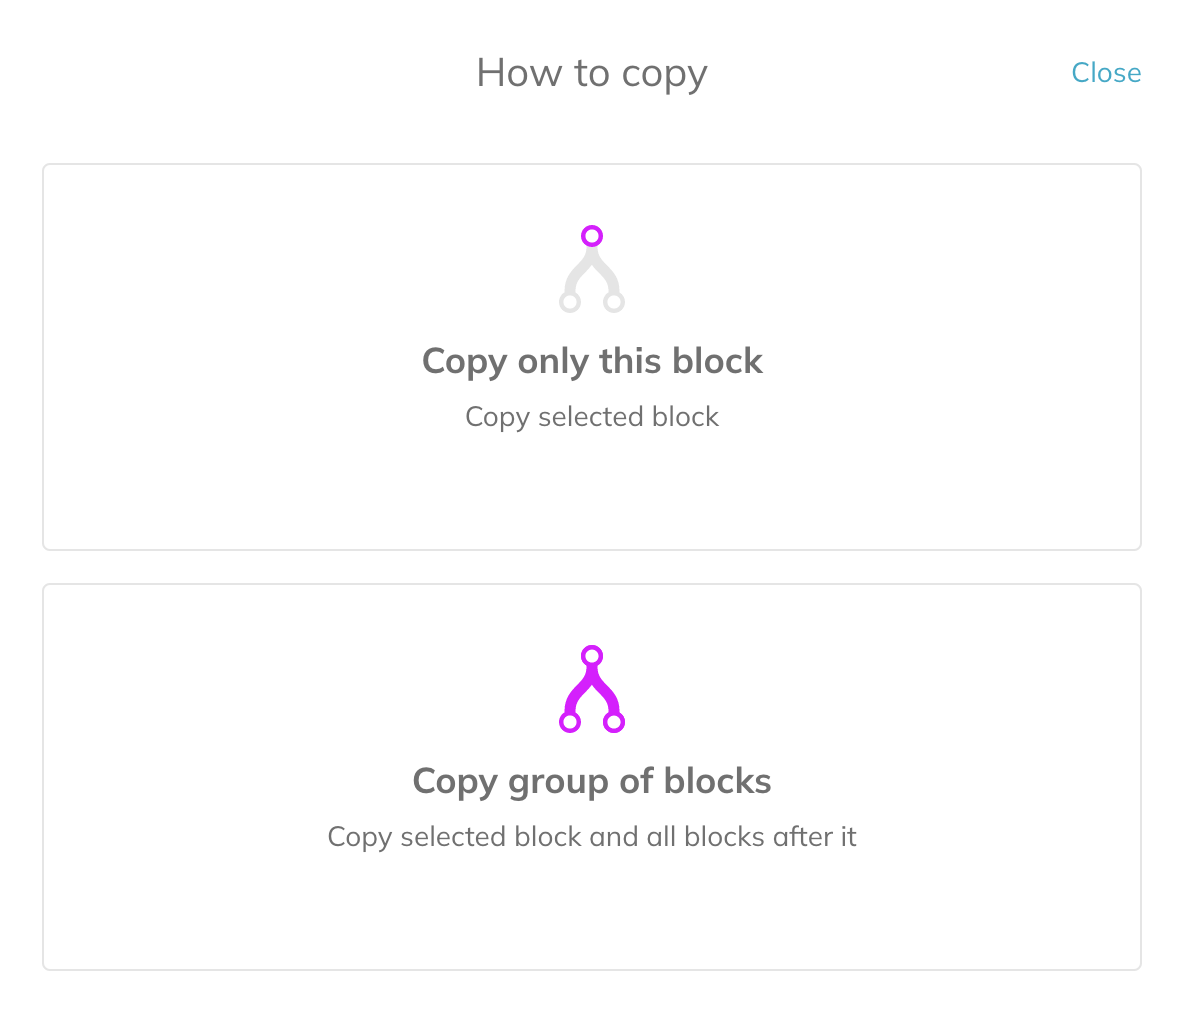 Copy block options: Copy only this block and Copy group of blocks